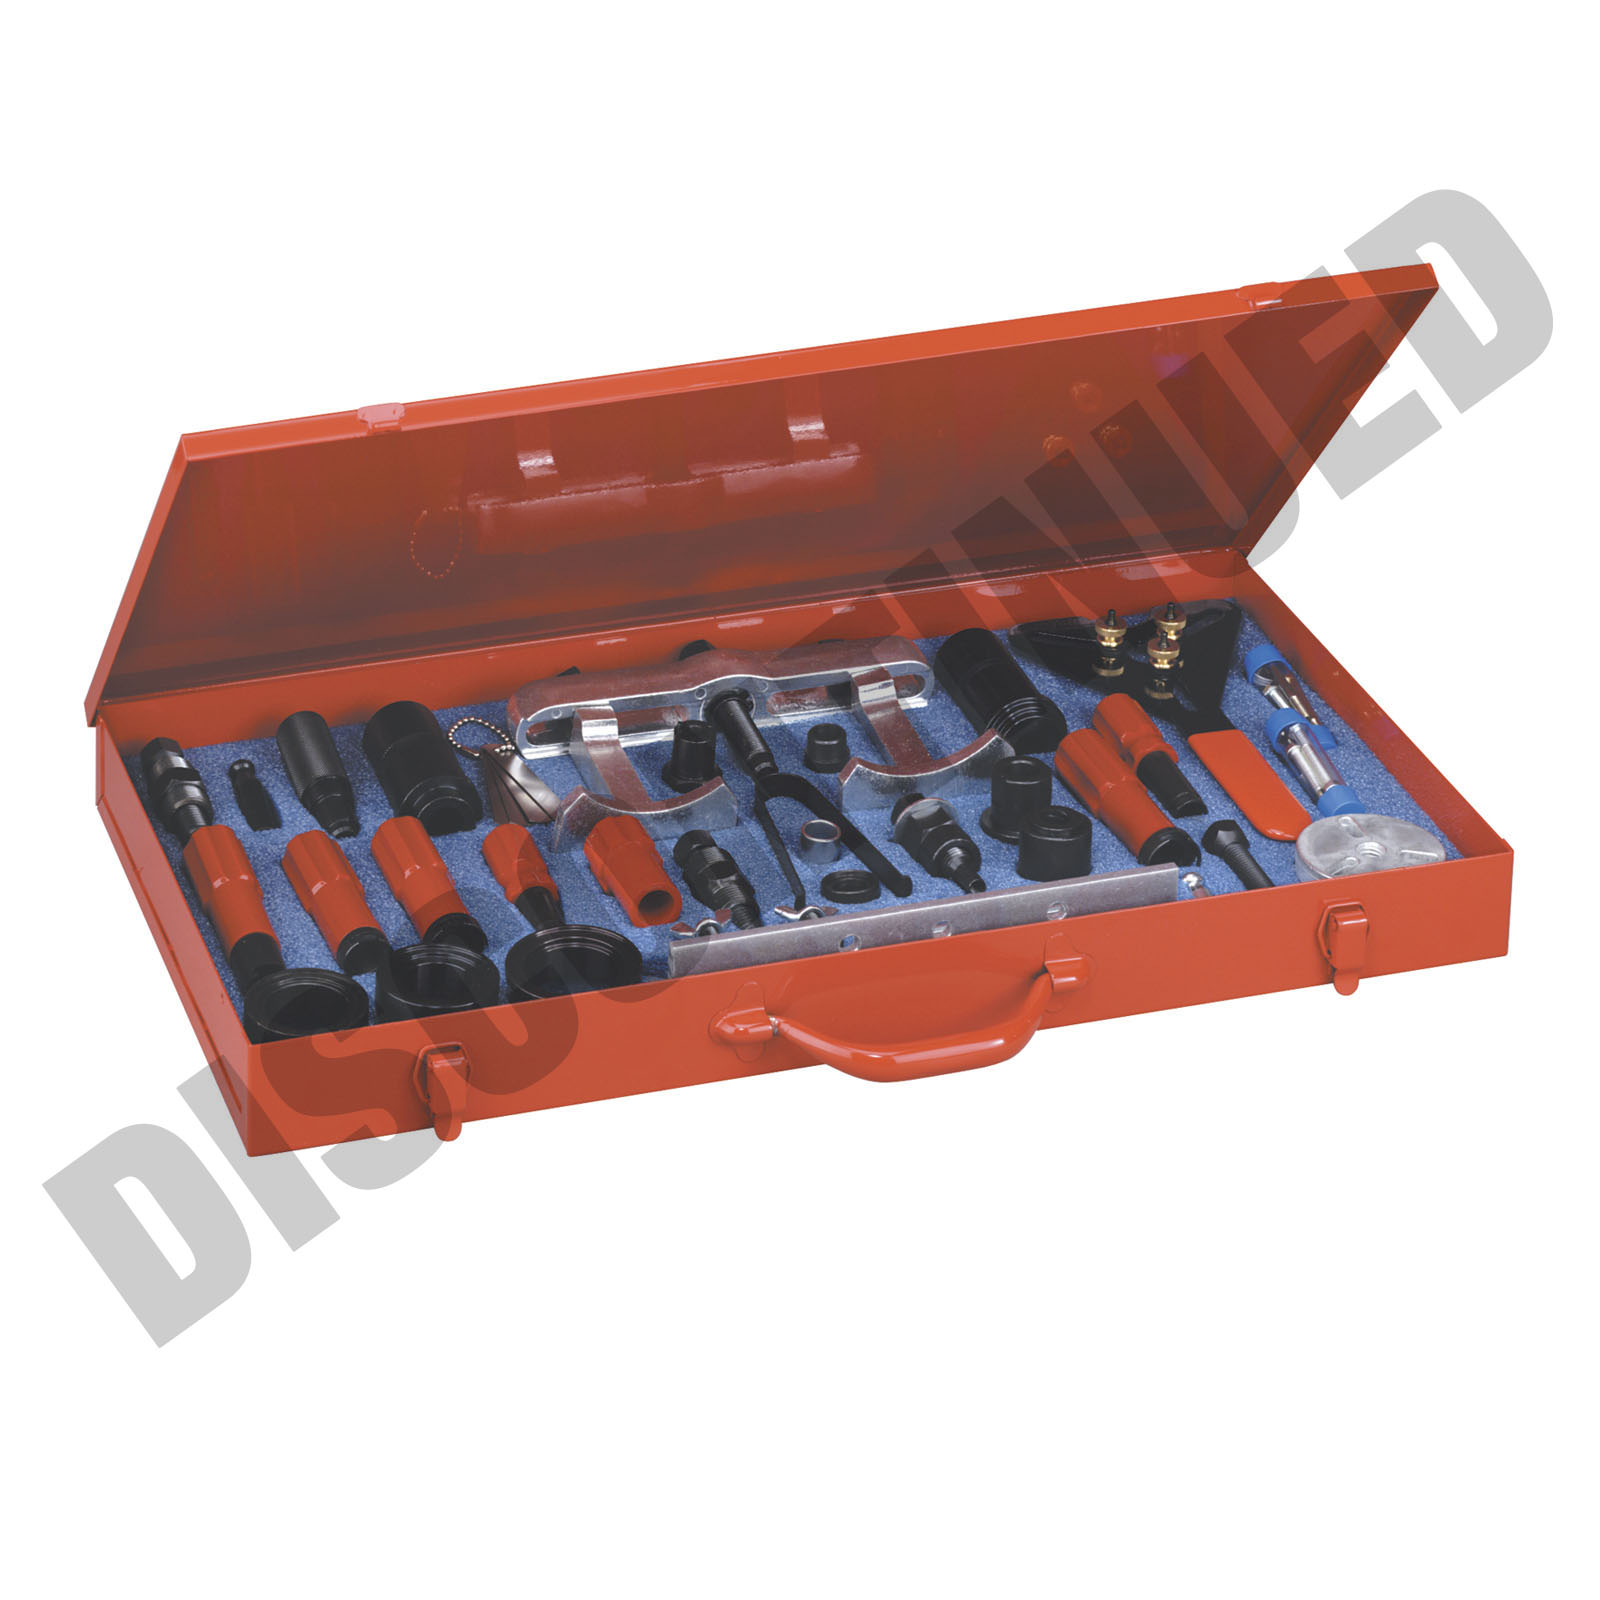 Locking Tool Boxes and Embedded Vacuum Valves